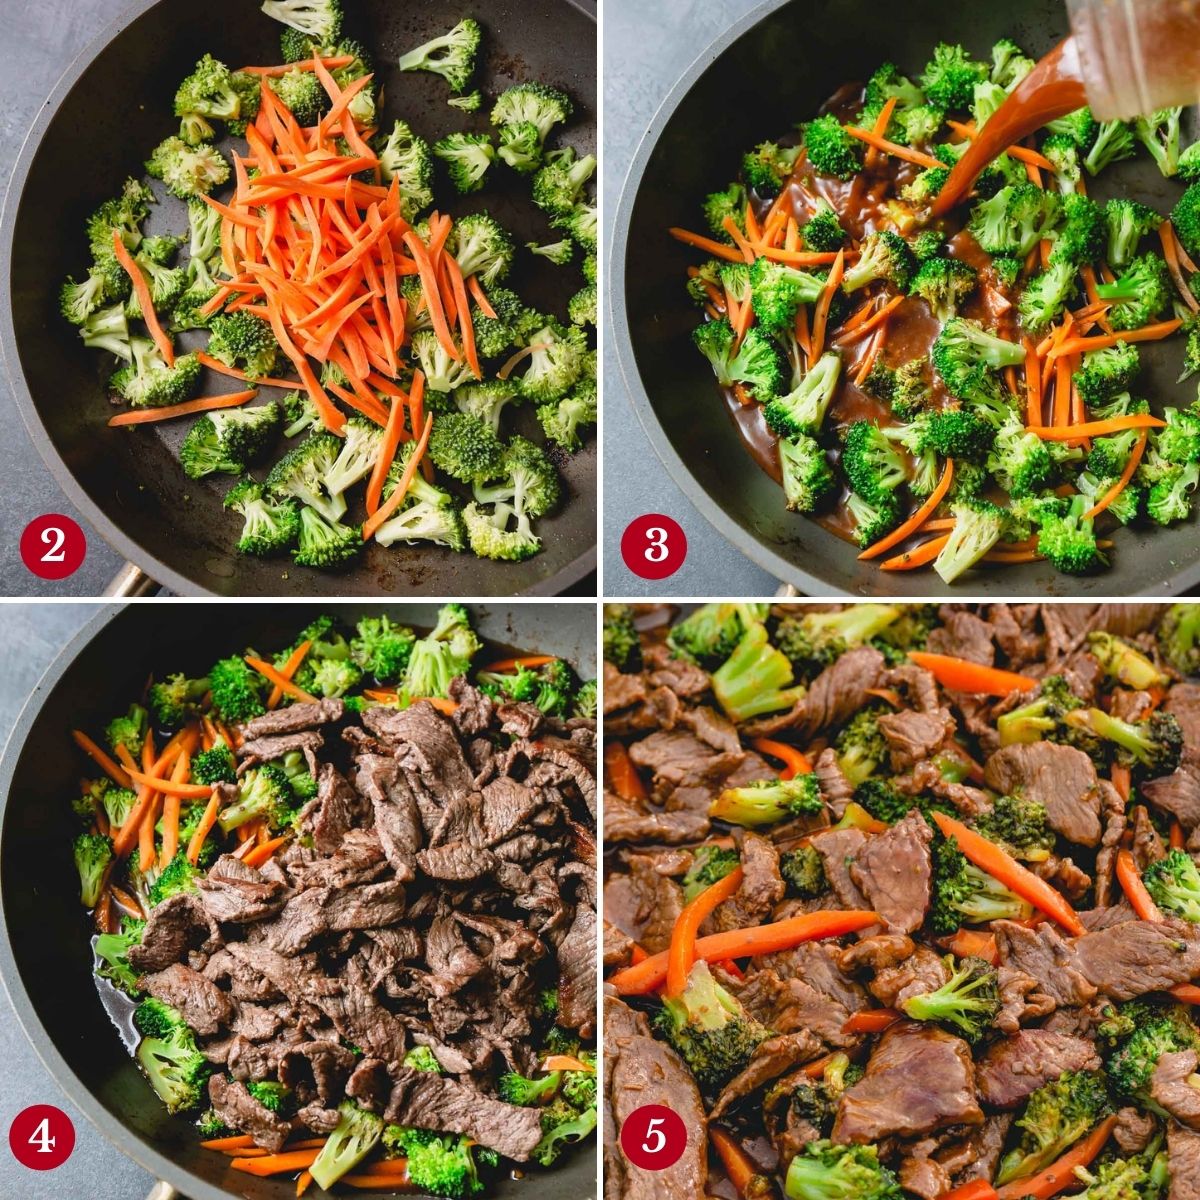 4 step by step photos of cooking the stir fry.